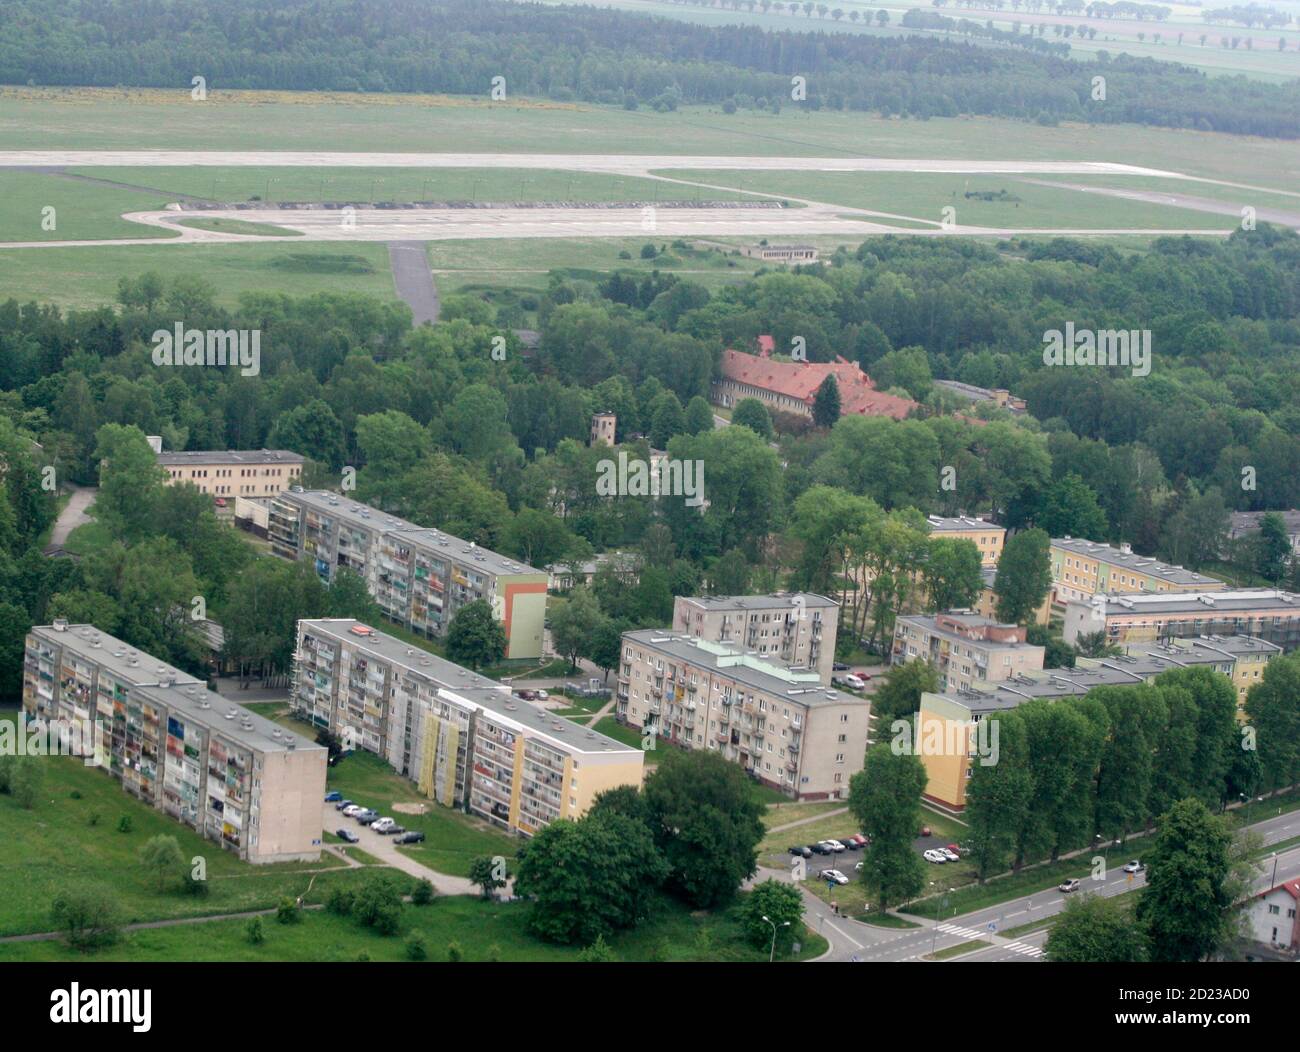 Aerial view of airfield and existing Polish military base with a housing estate in Redzikowo near Slupsk, northern Poland, May 27, 2007. The future location of the U.S. anti-missile shield in Poland is still an official secret but in the northern city of Slupsk the locals already know they may live next to it. The facility, which has caused controversy in Europe and anger in Moscow, is a hot topic in Slupsk and nearby Redzikowo, an ex-military airfield poised to house the rocket silos and about 200 U.S. military personnel.   To match feature SHIELD-POLAND/   REUTERS/Kacper Pempel (POLAND) Stock Photo